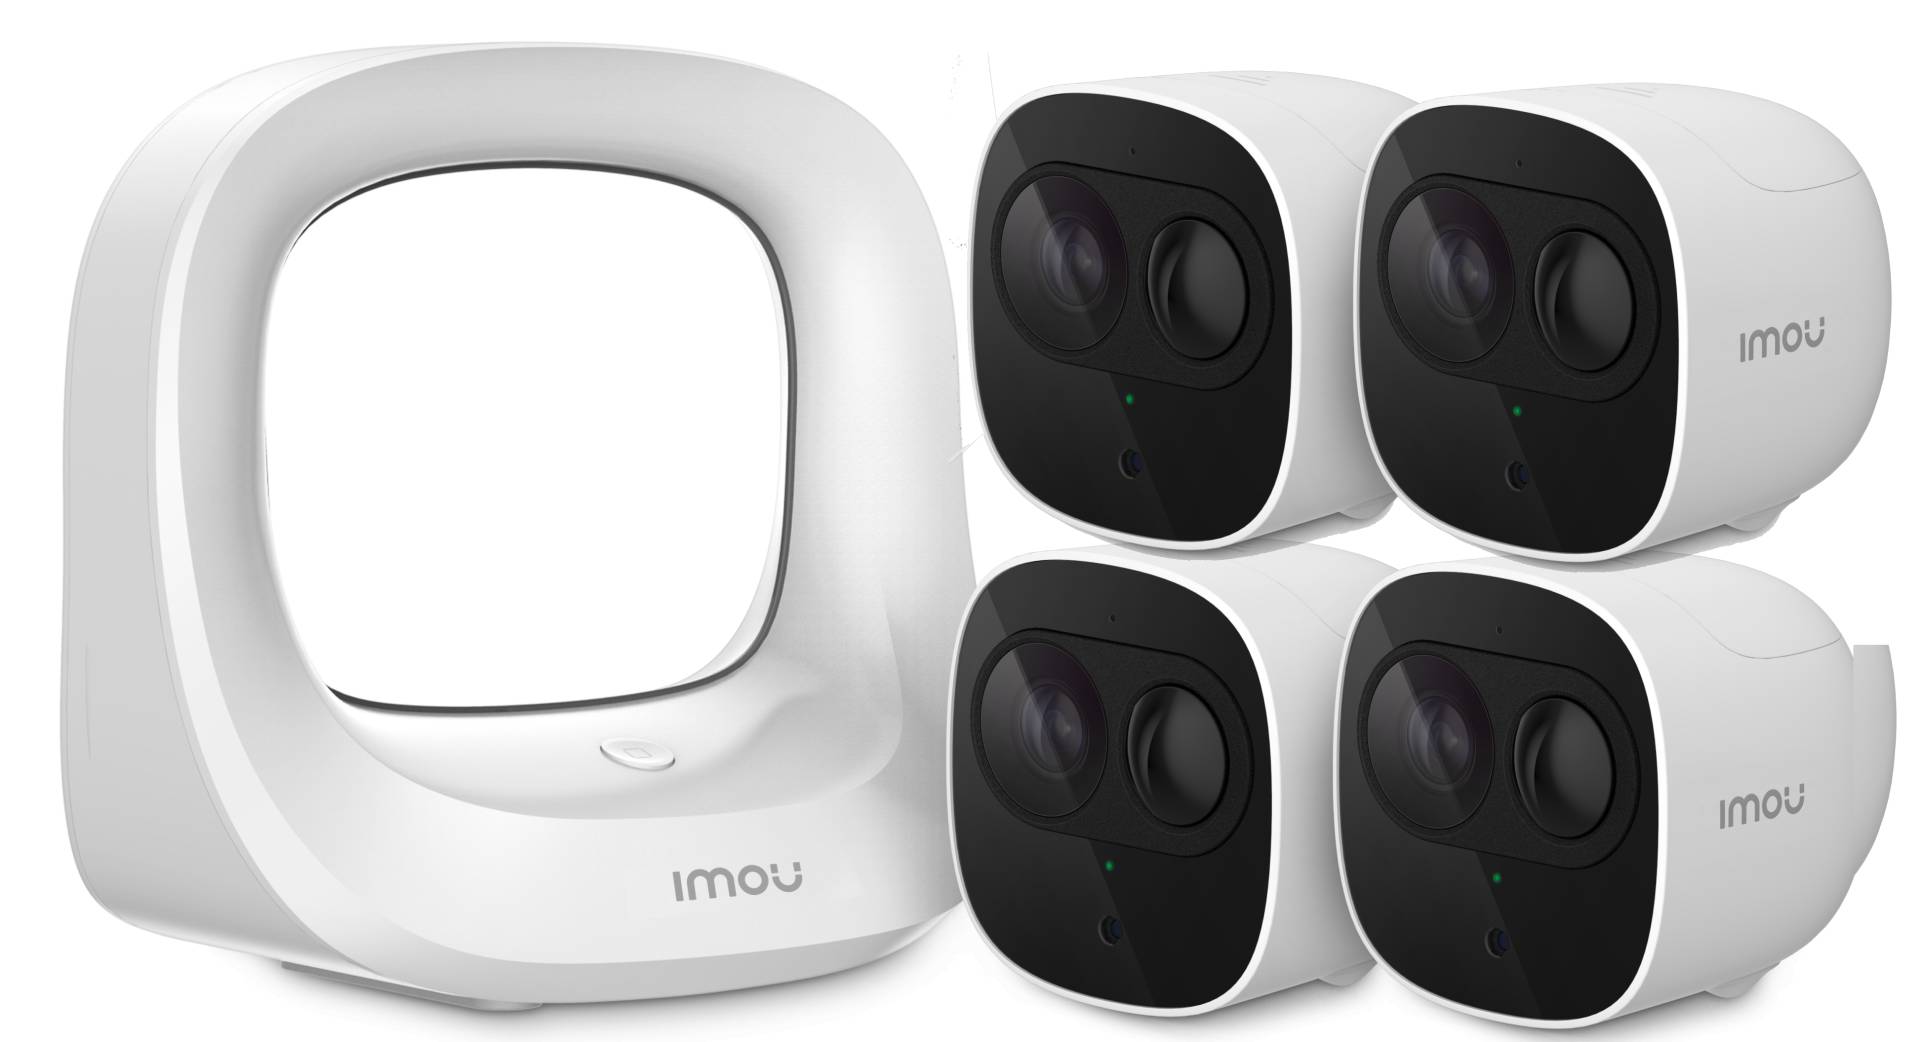 IMOU Cell Pro kabelloses Security System inkl. 4 Kameras von IMOU